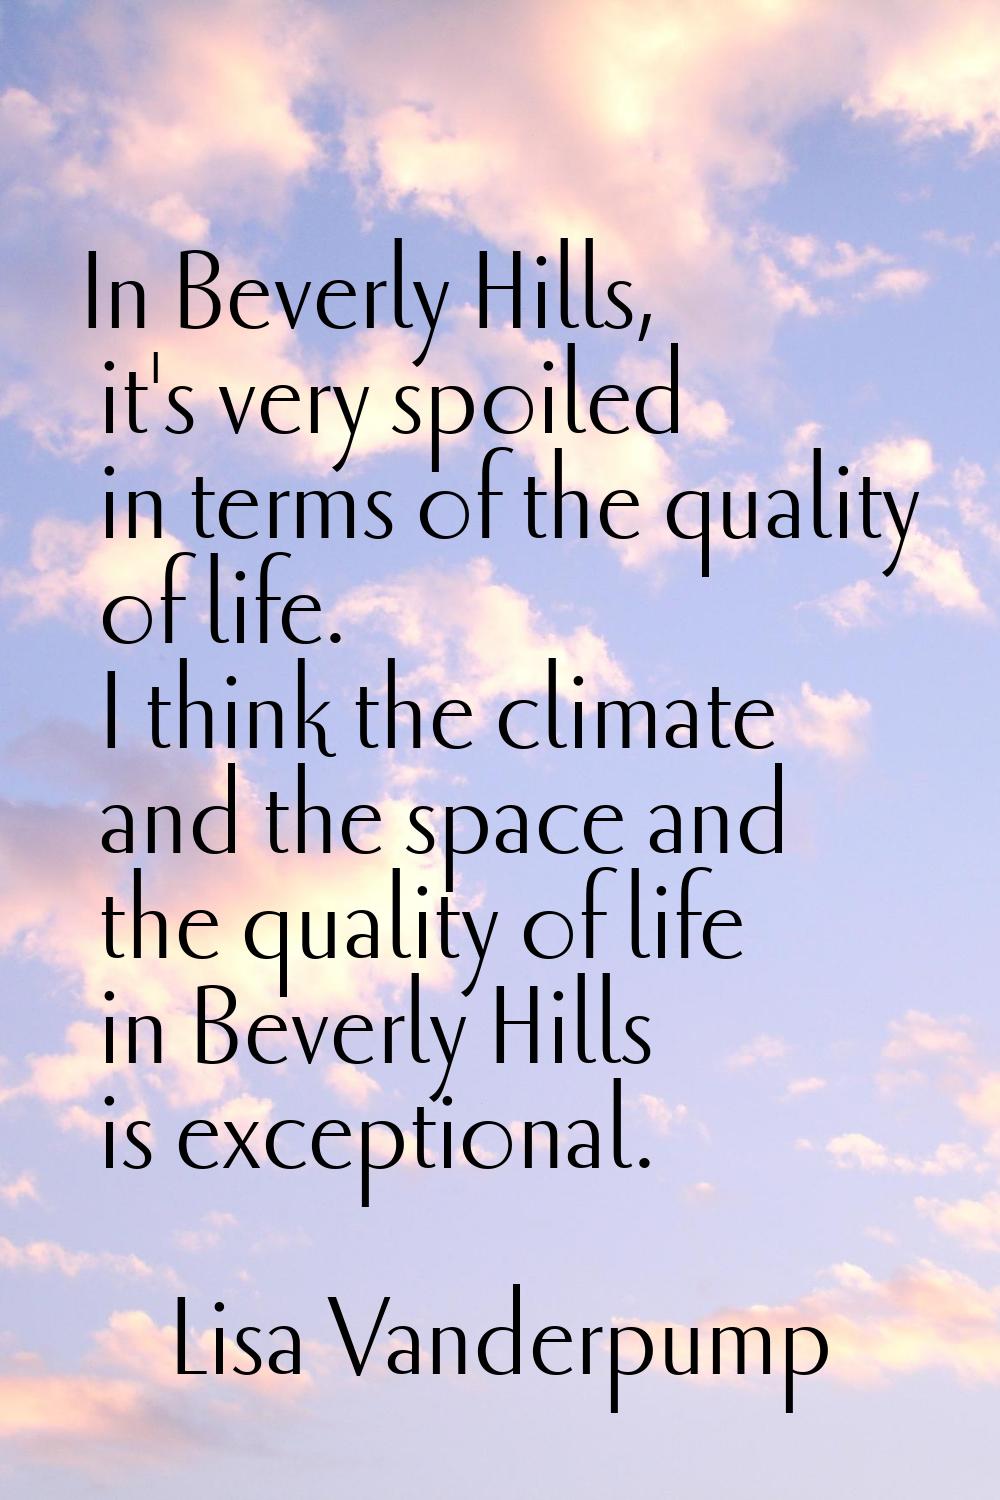 In Beverly Hills, it's very spoiled in terms of the quality of life. I think the climate and the sp